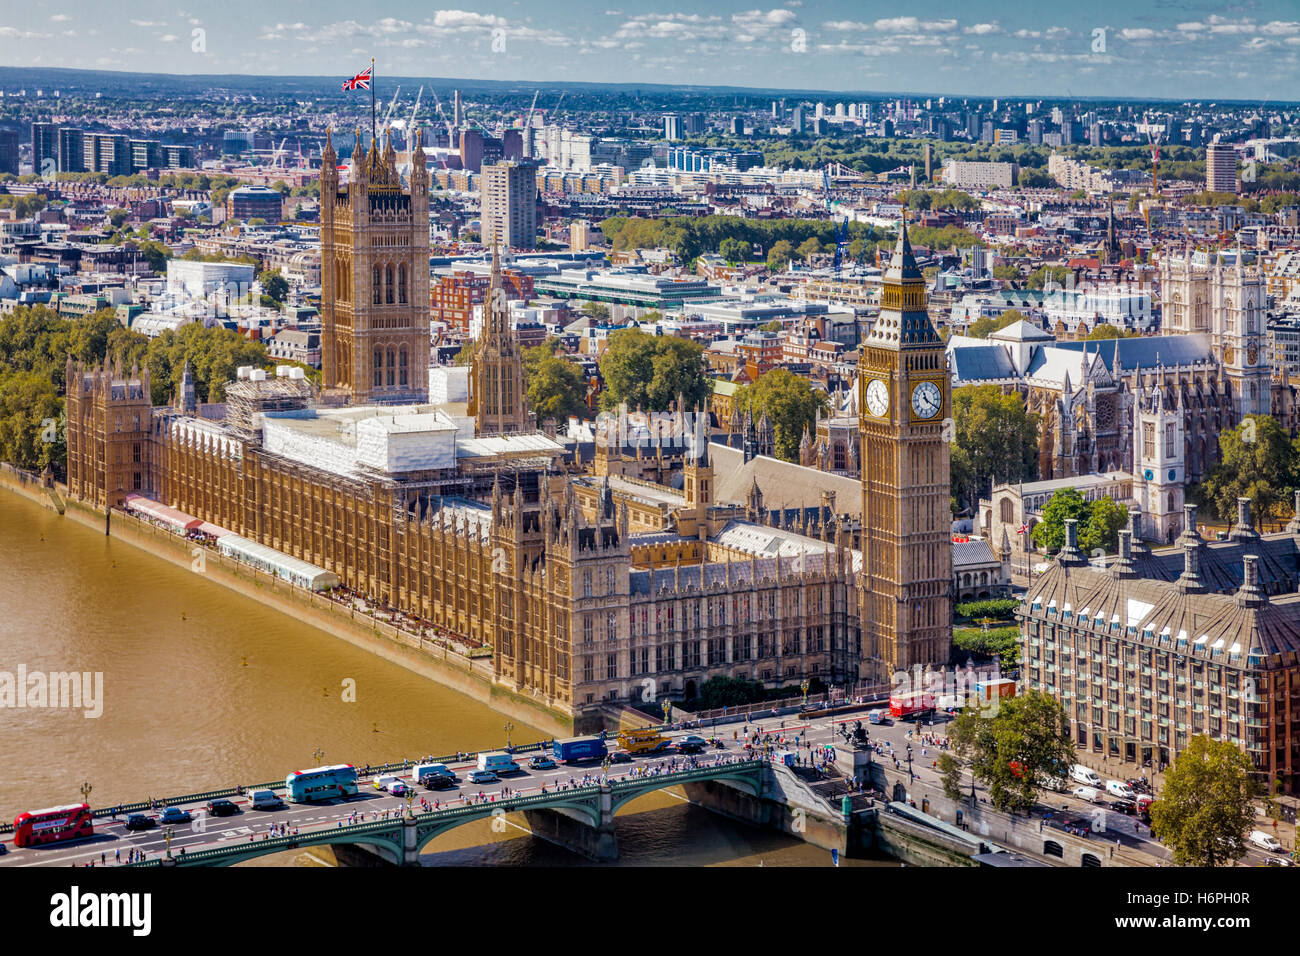 England: panorama of London City, including River Thames, Westminster Bridge, Palace of Westminster, Houses of Parliament, Big Ben, Portcullis House Stock Photo